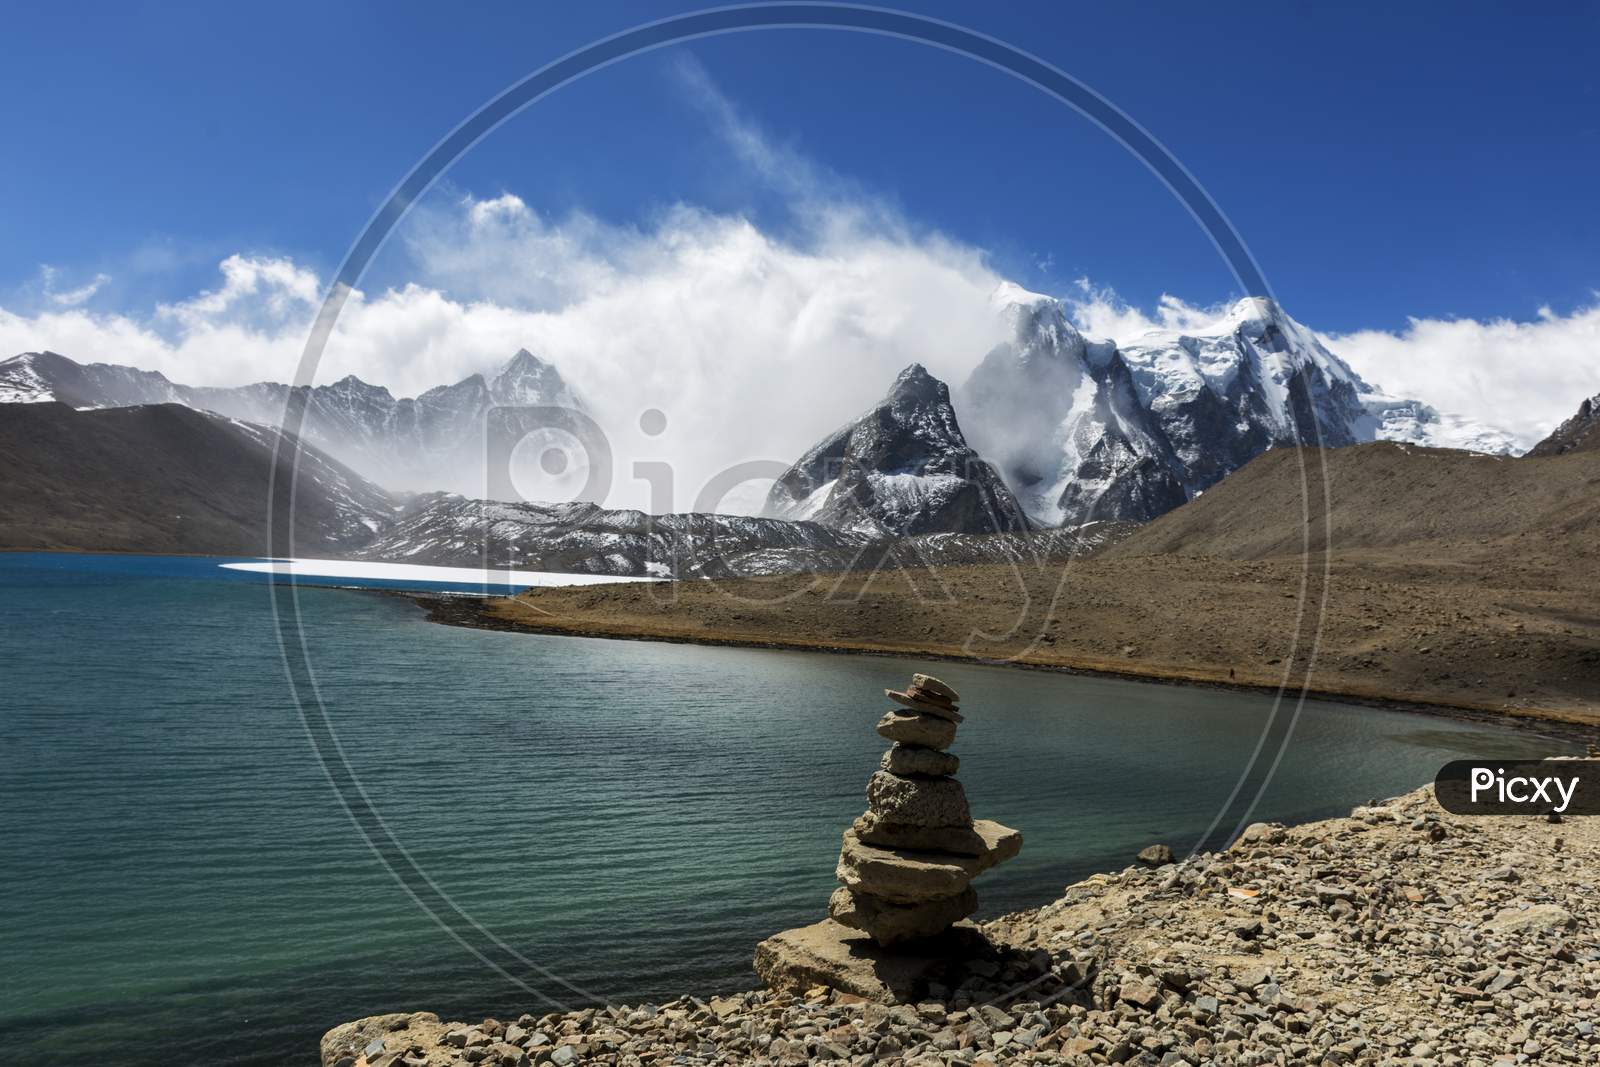 A Beautiful Landscape Of Gurudongmar Lake With Rocks In Forte Ground And Mountain With Blue Sky In Background. Gurudongmar Lake One Of The Highest Lake Of The World And India Located At An Altitude Of 17,800 Ft, In The Indian State Of Sikkim